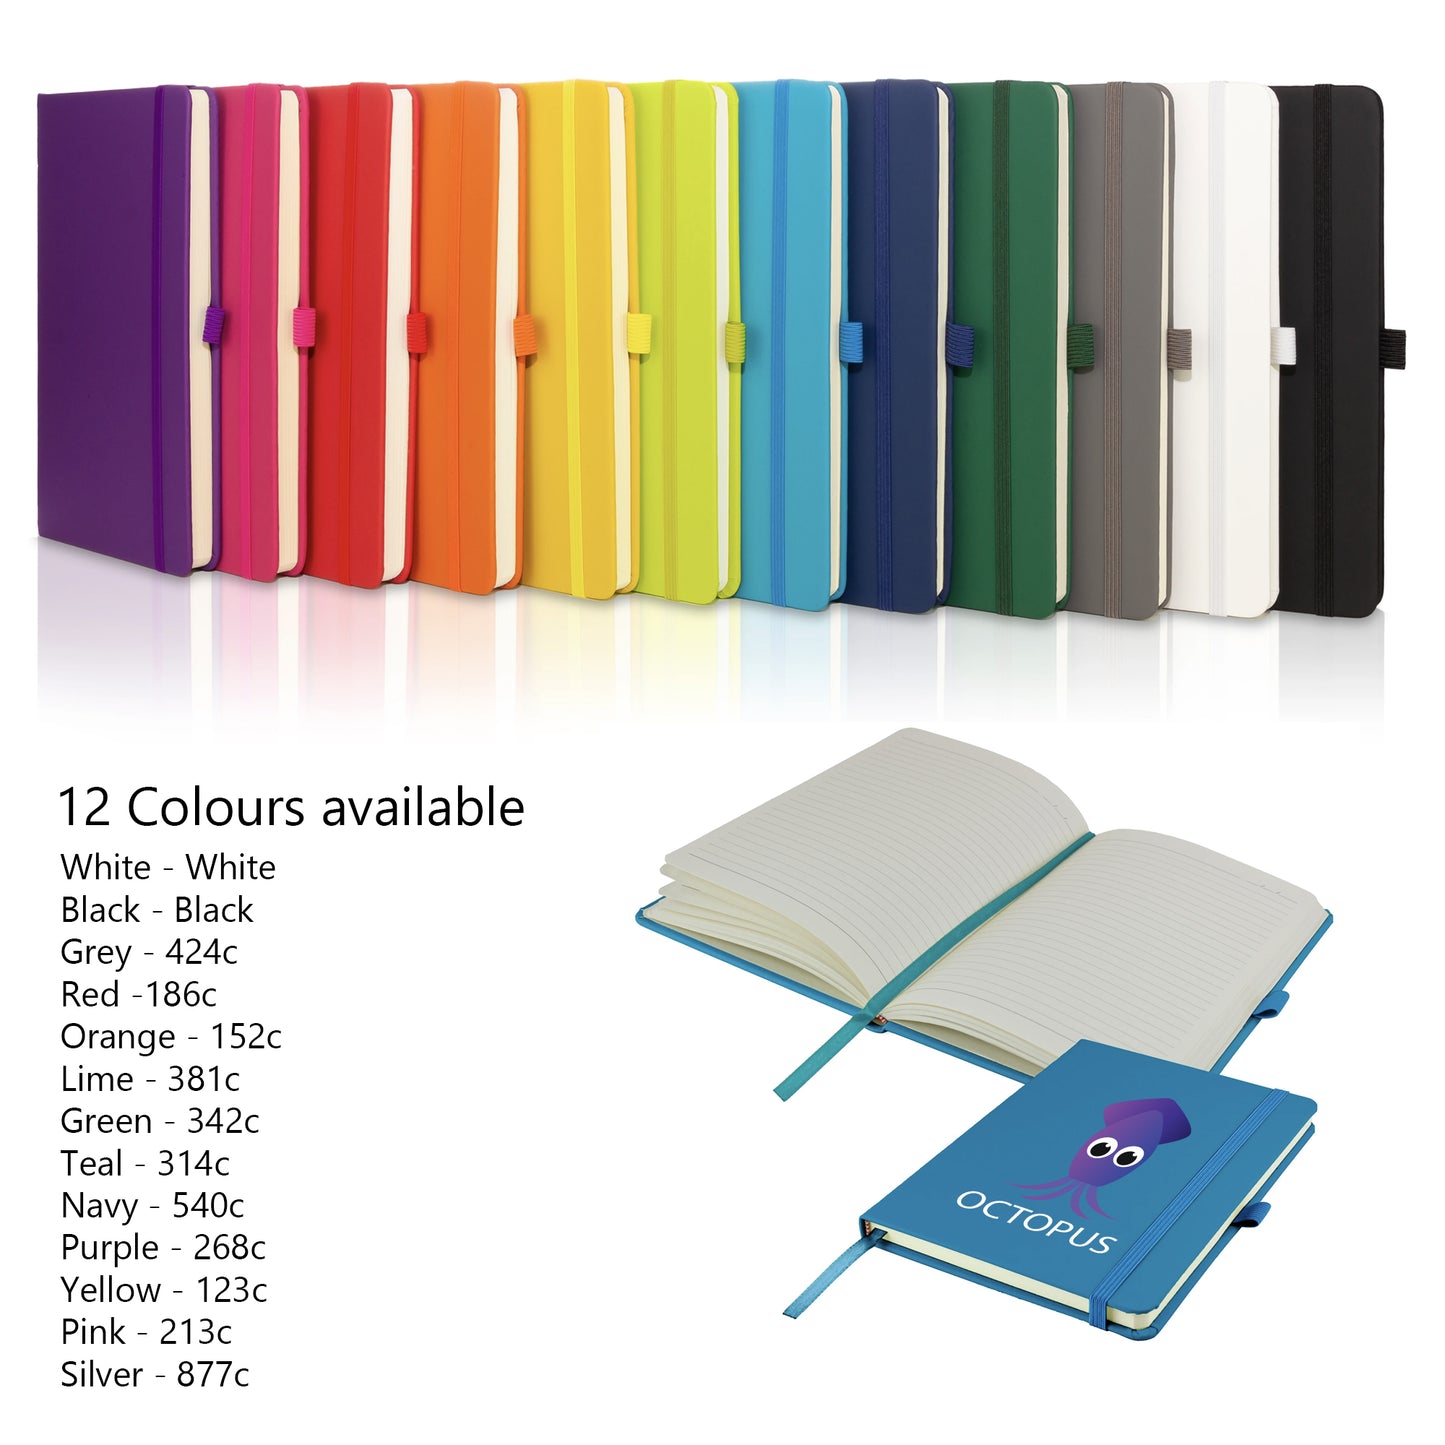 Soft feel PU Leather A5 Notebook - 196 pages